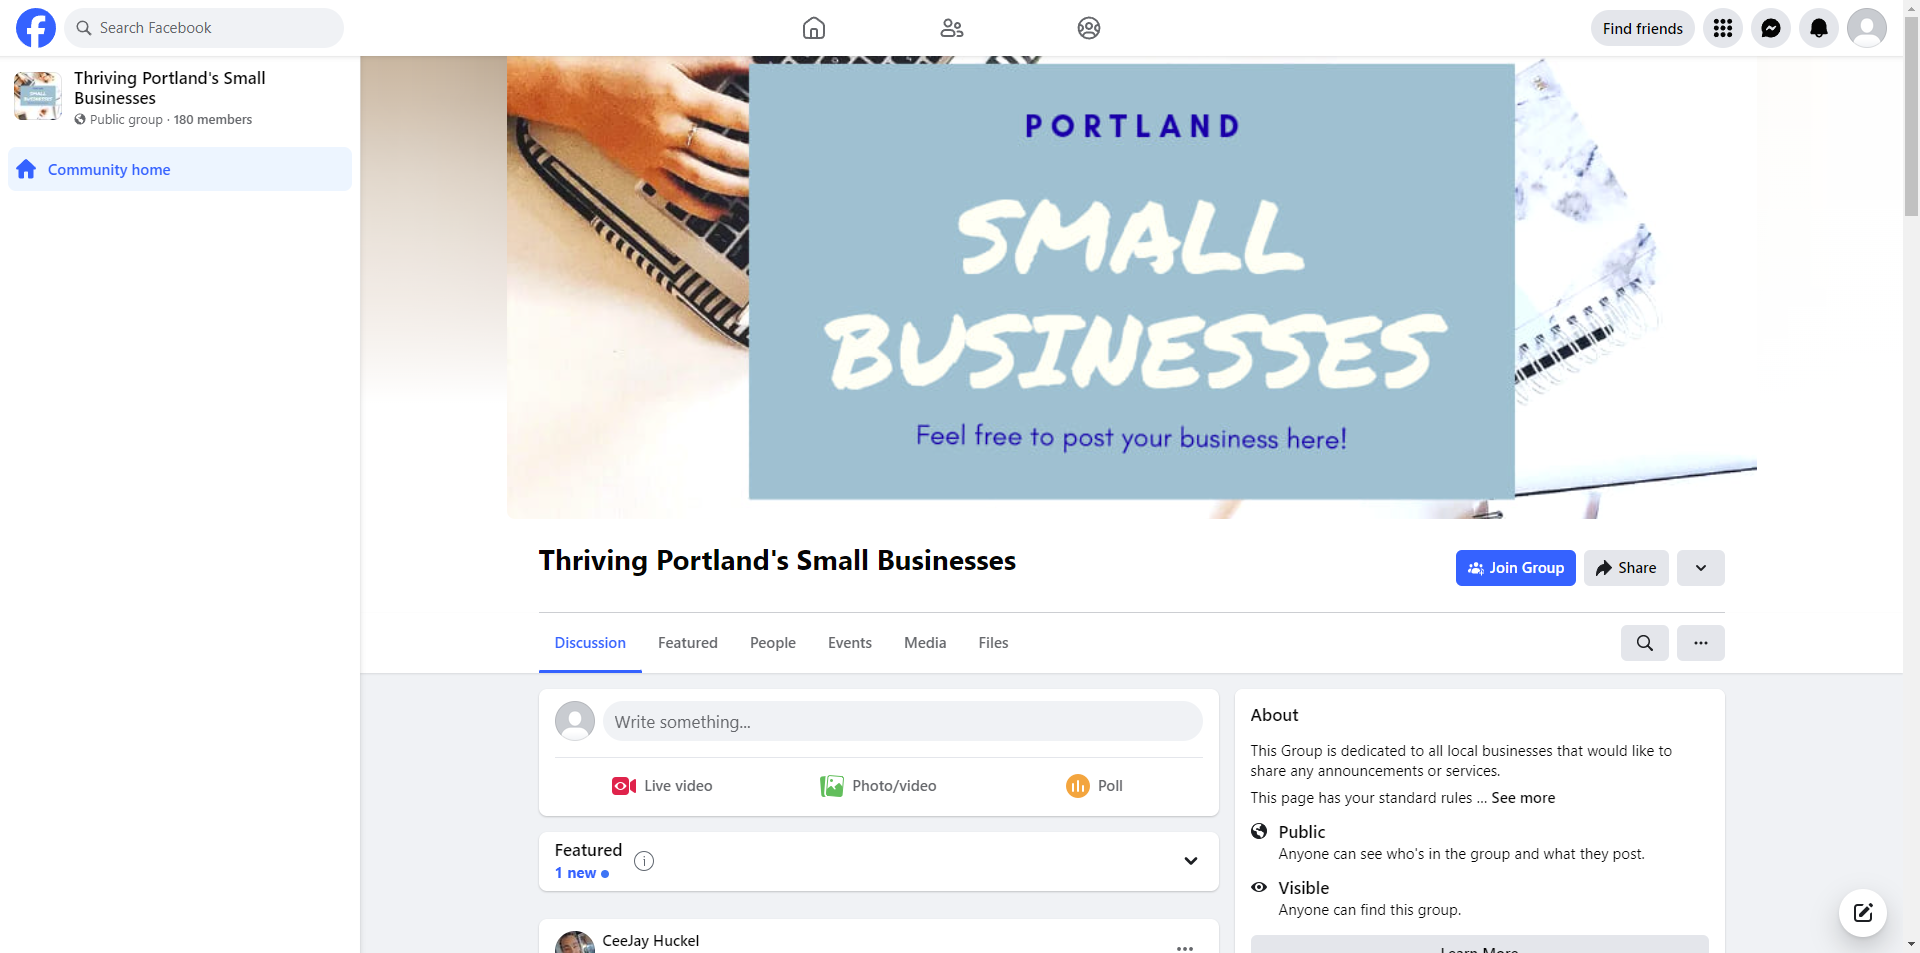 Thriving Portland's Small Businesses